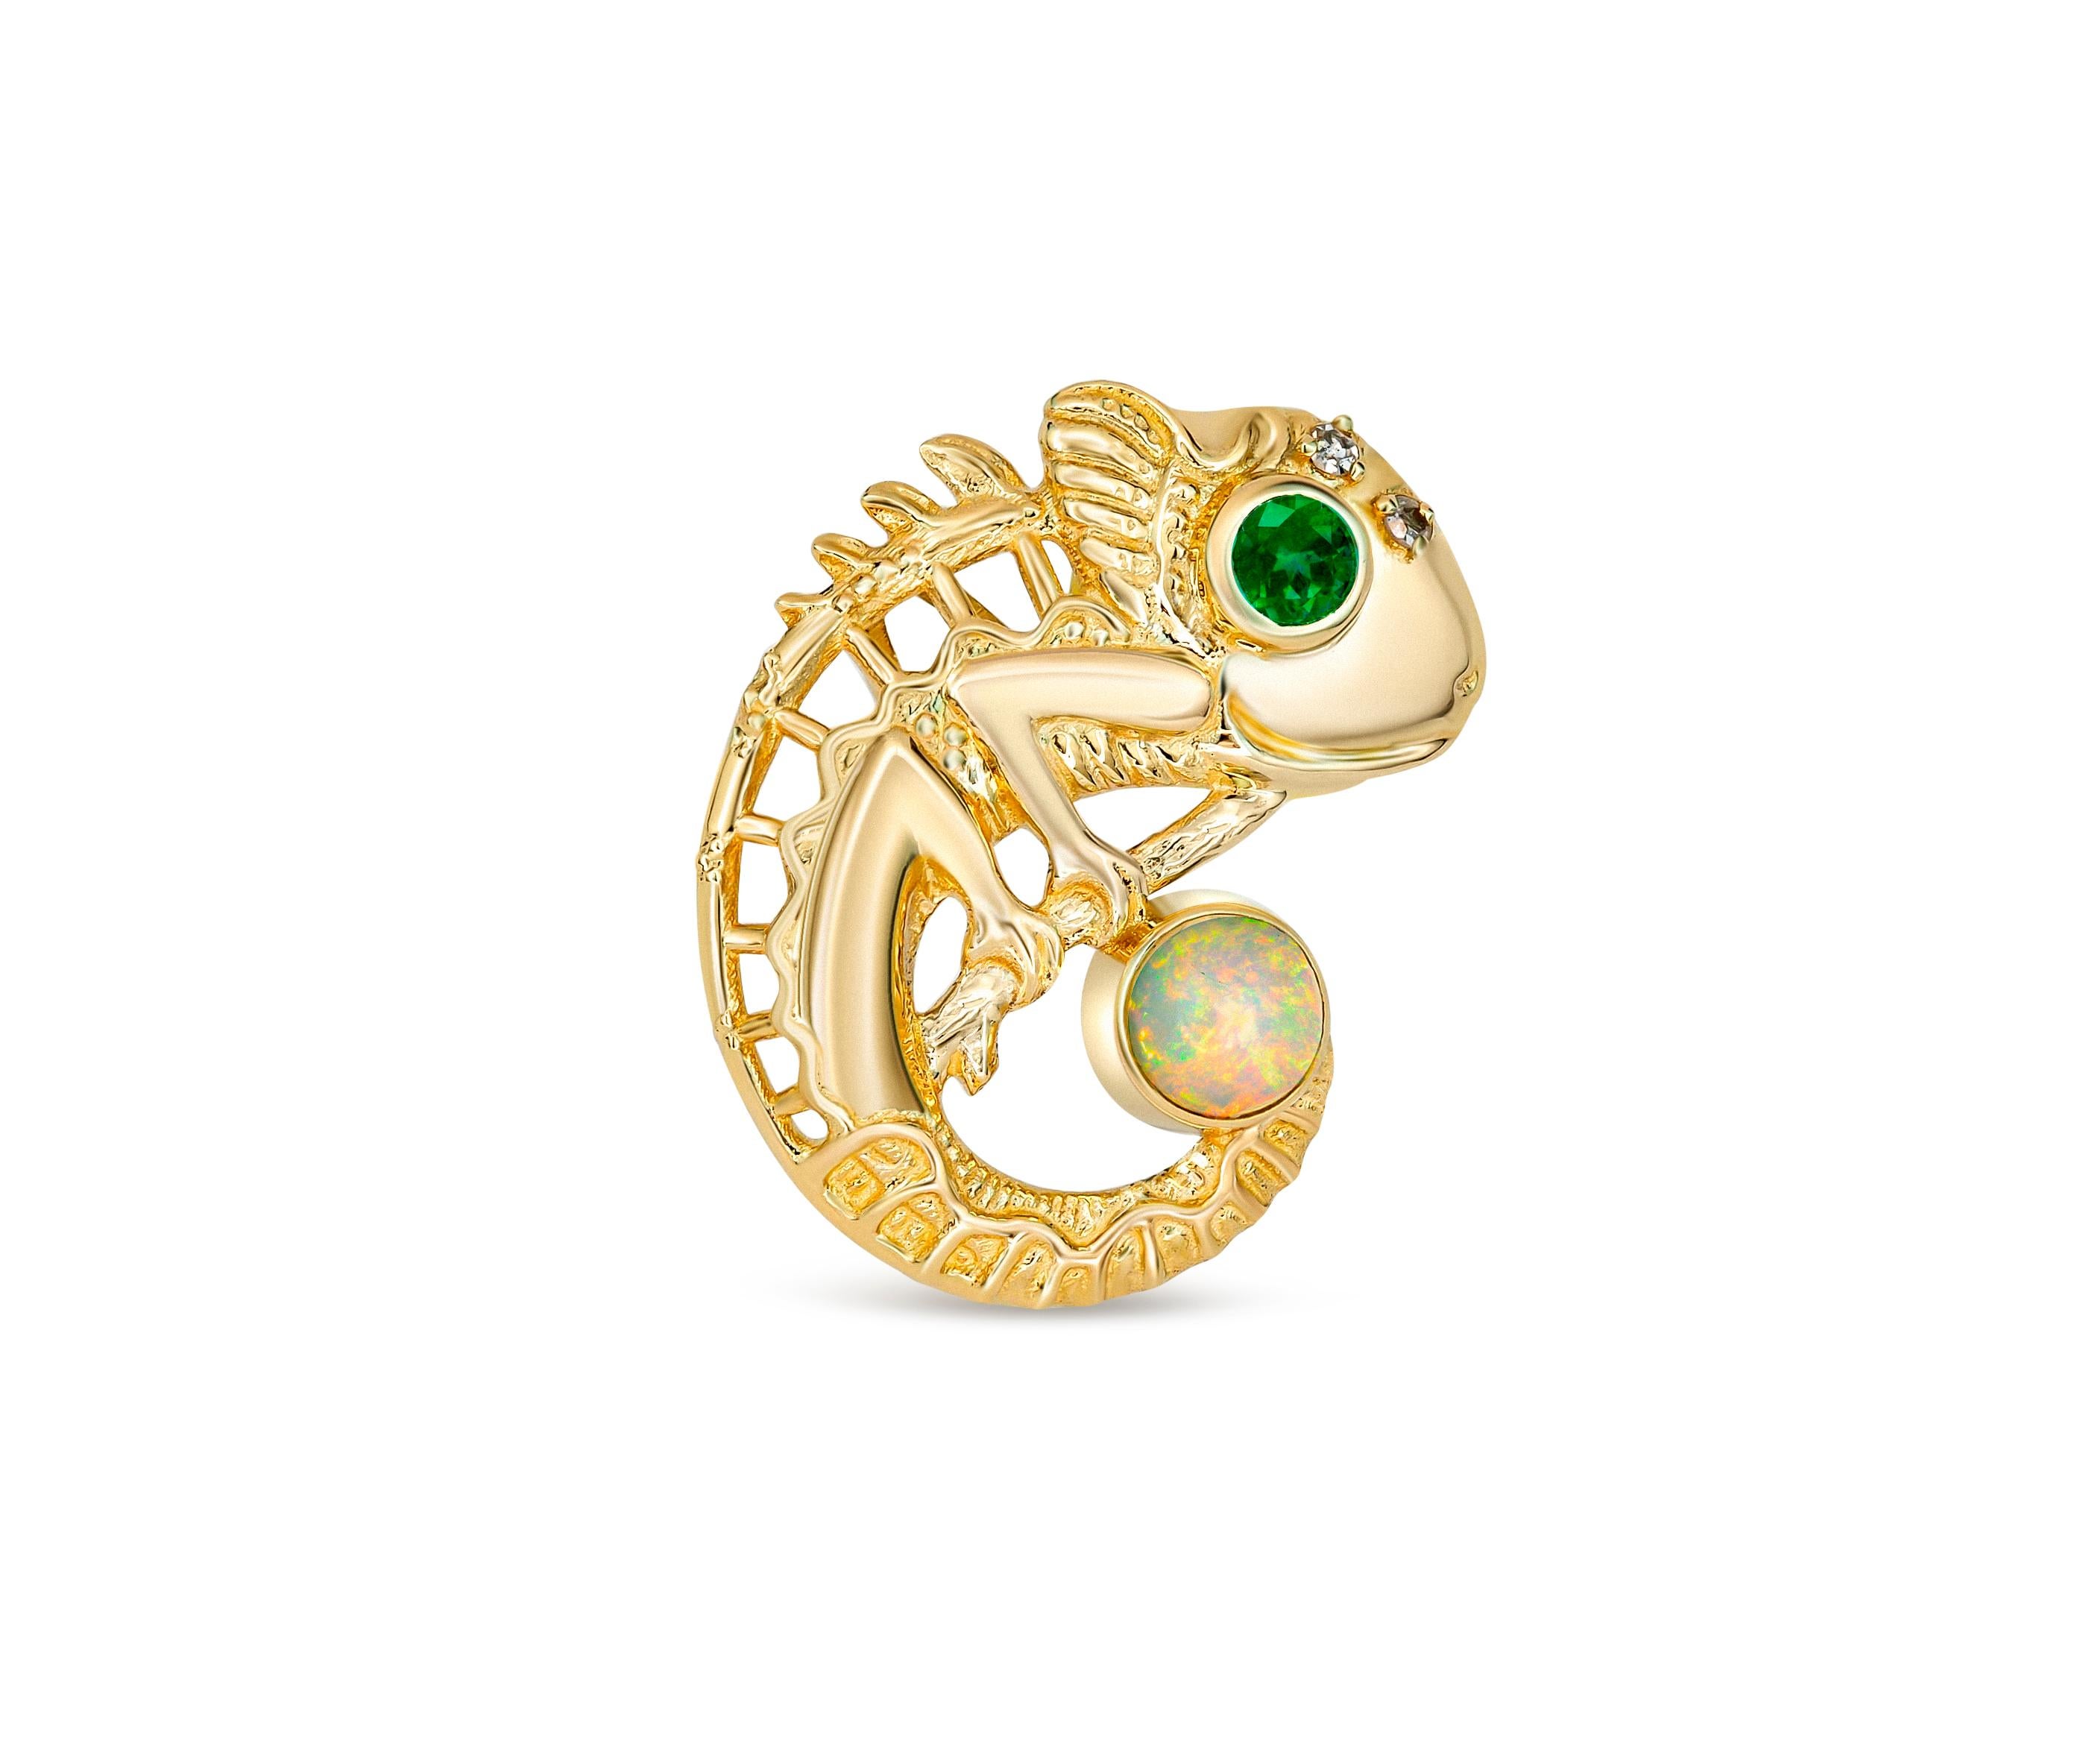 Chameleon pendant with opal, emerald and diamonds in 14k Gold. 
Reptile gold Charm. Gold Lizard pendant. Animal, Wildlife gold pendant.

Metal: 14k gold
19.3x13.5 mm size
Weight 2.00 gr

Gemstones:
Opal: round cabochon shape, orange-yellow with